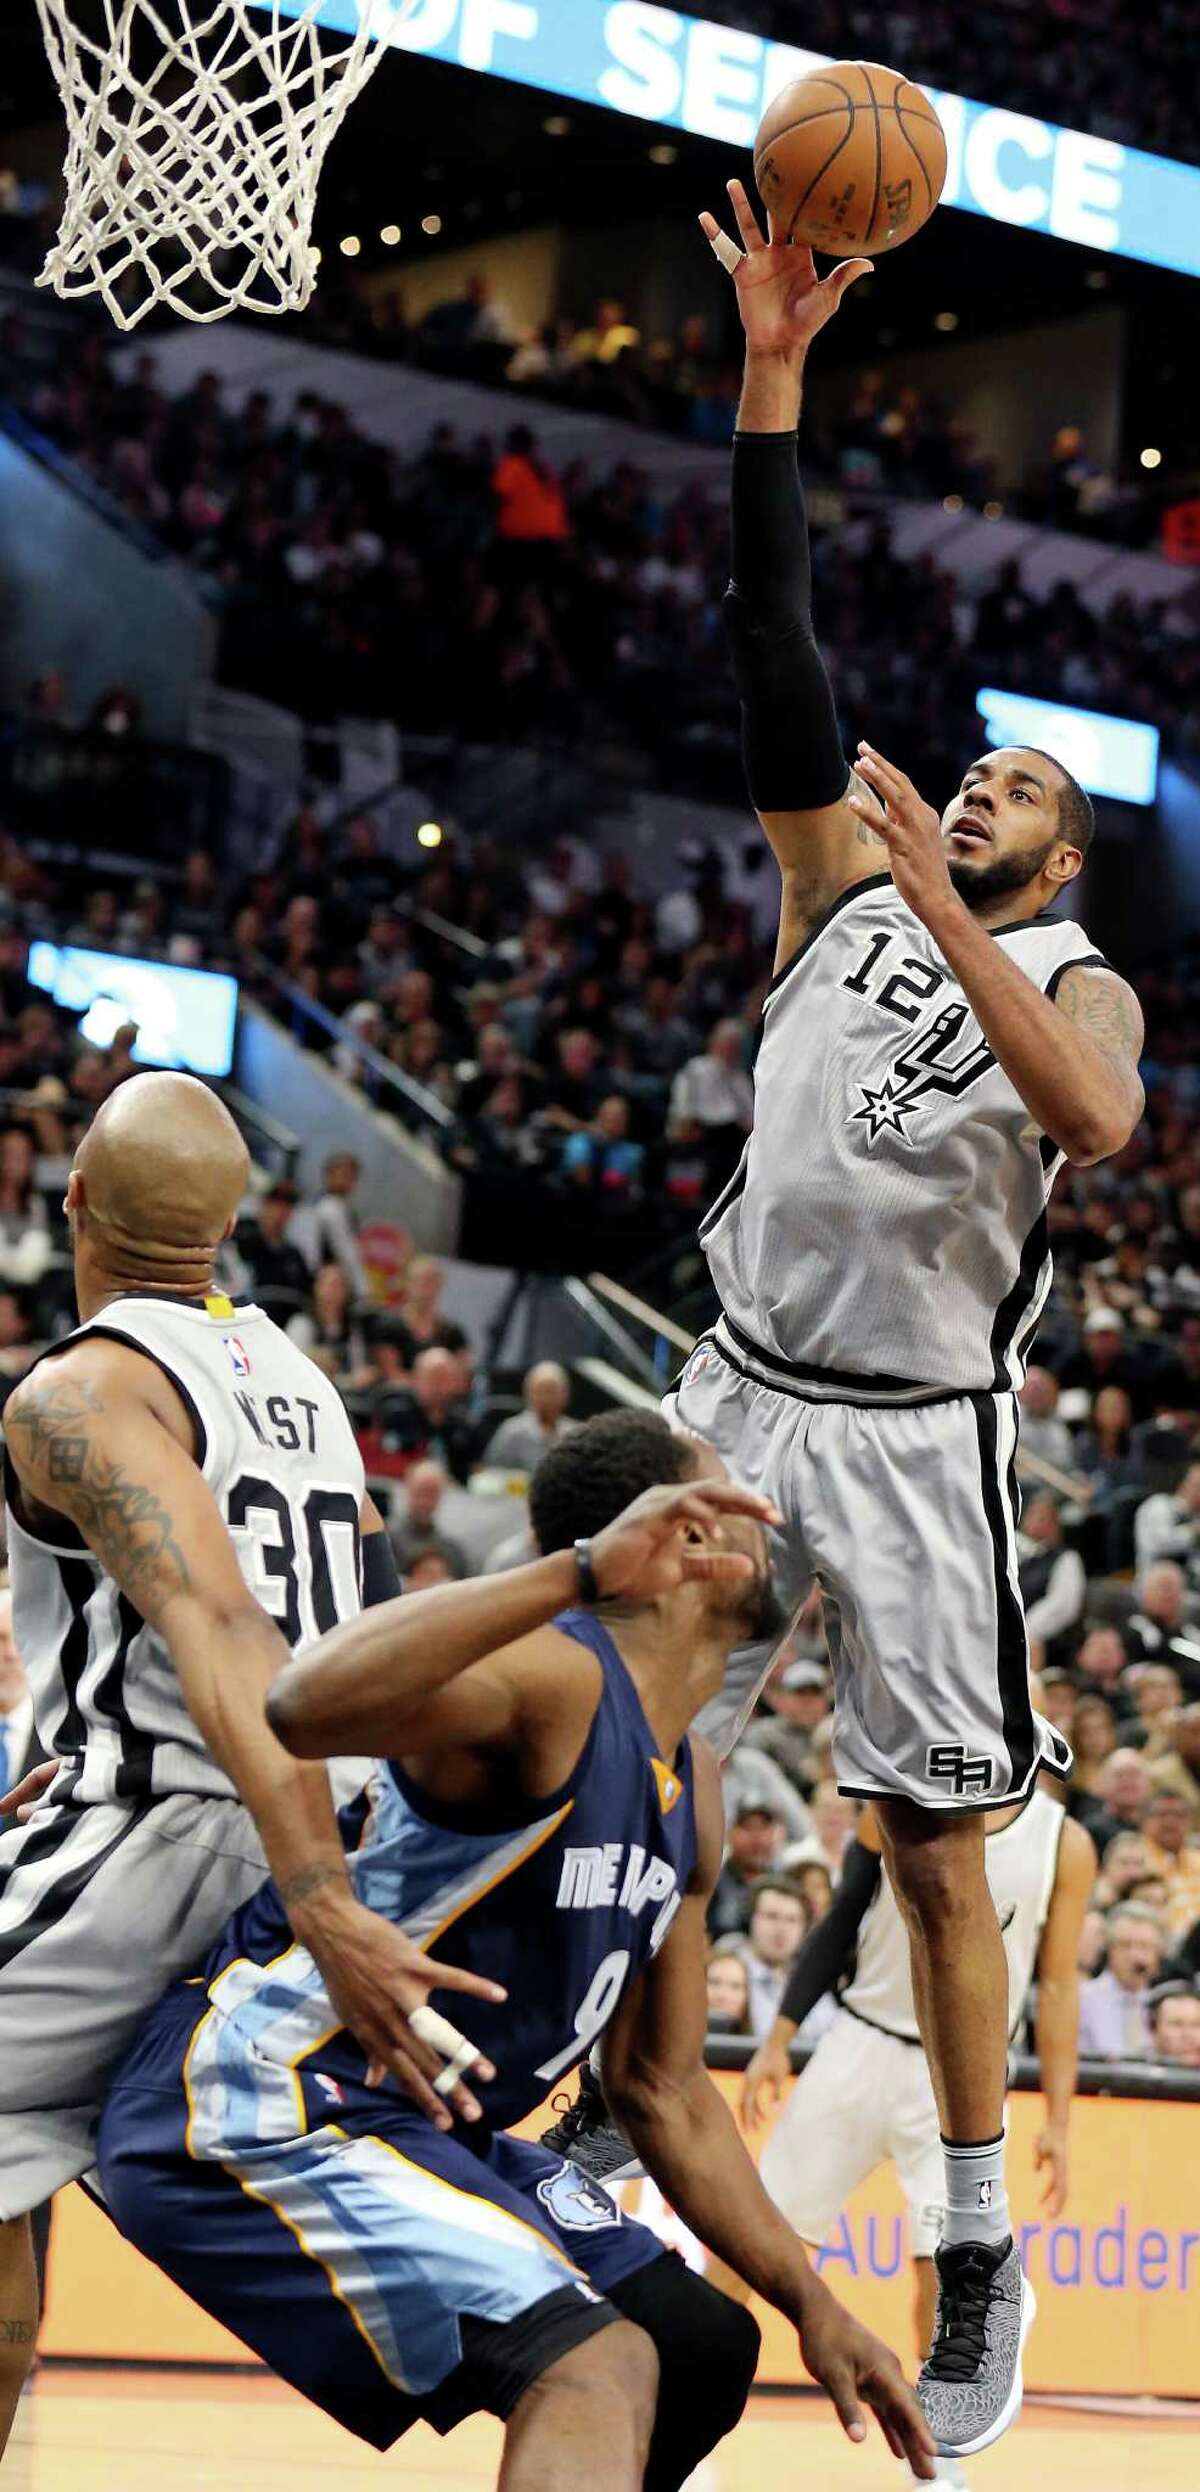 San Antonio Spurs' LaMarcus Aldridge shoots as San Antonio Spurs' David West and Memphis Grizzlies' Tony Allen look on during first half action of Game 1 in the first round of the Western Conference playoffs Sunday April 17, 2016 at the AT&T Center.